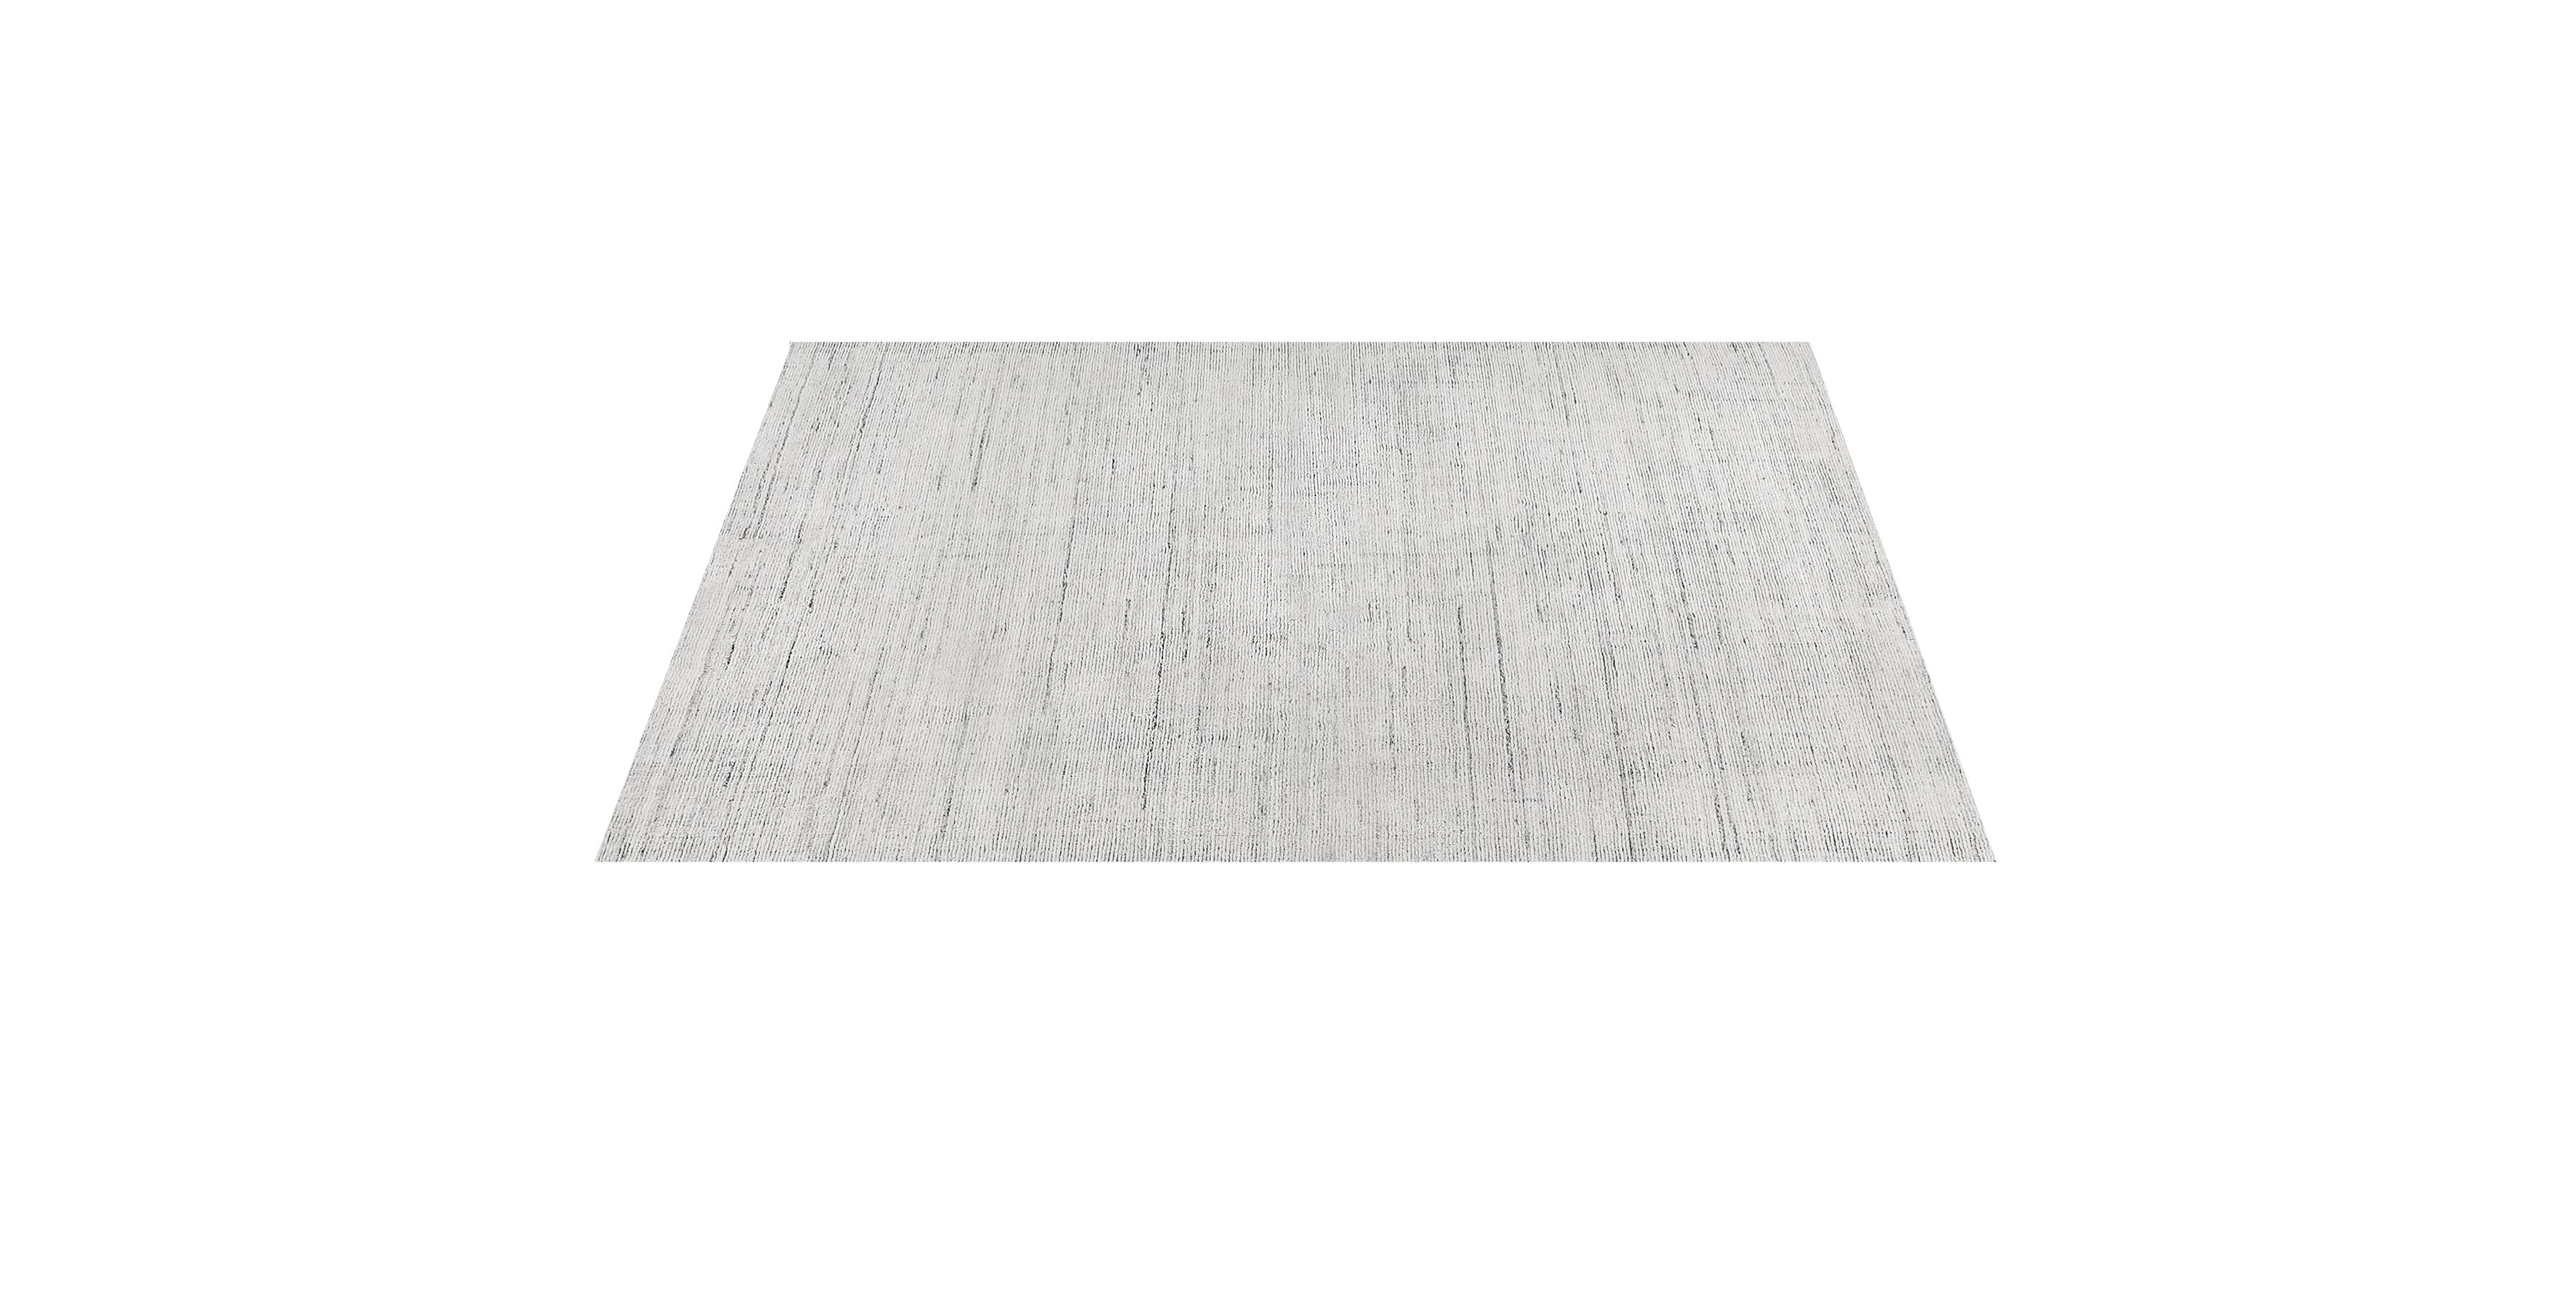 For Sale: Beige (Performance Distressed Natural) Ben Soleimani Performance Distressed Rug 10'x14' 3